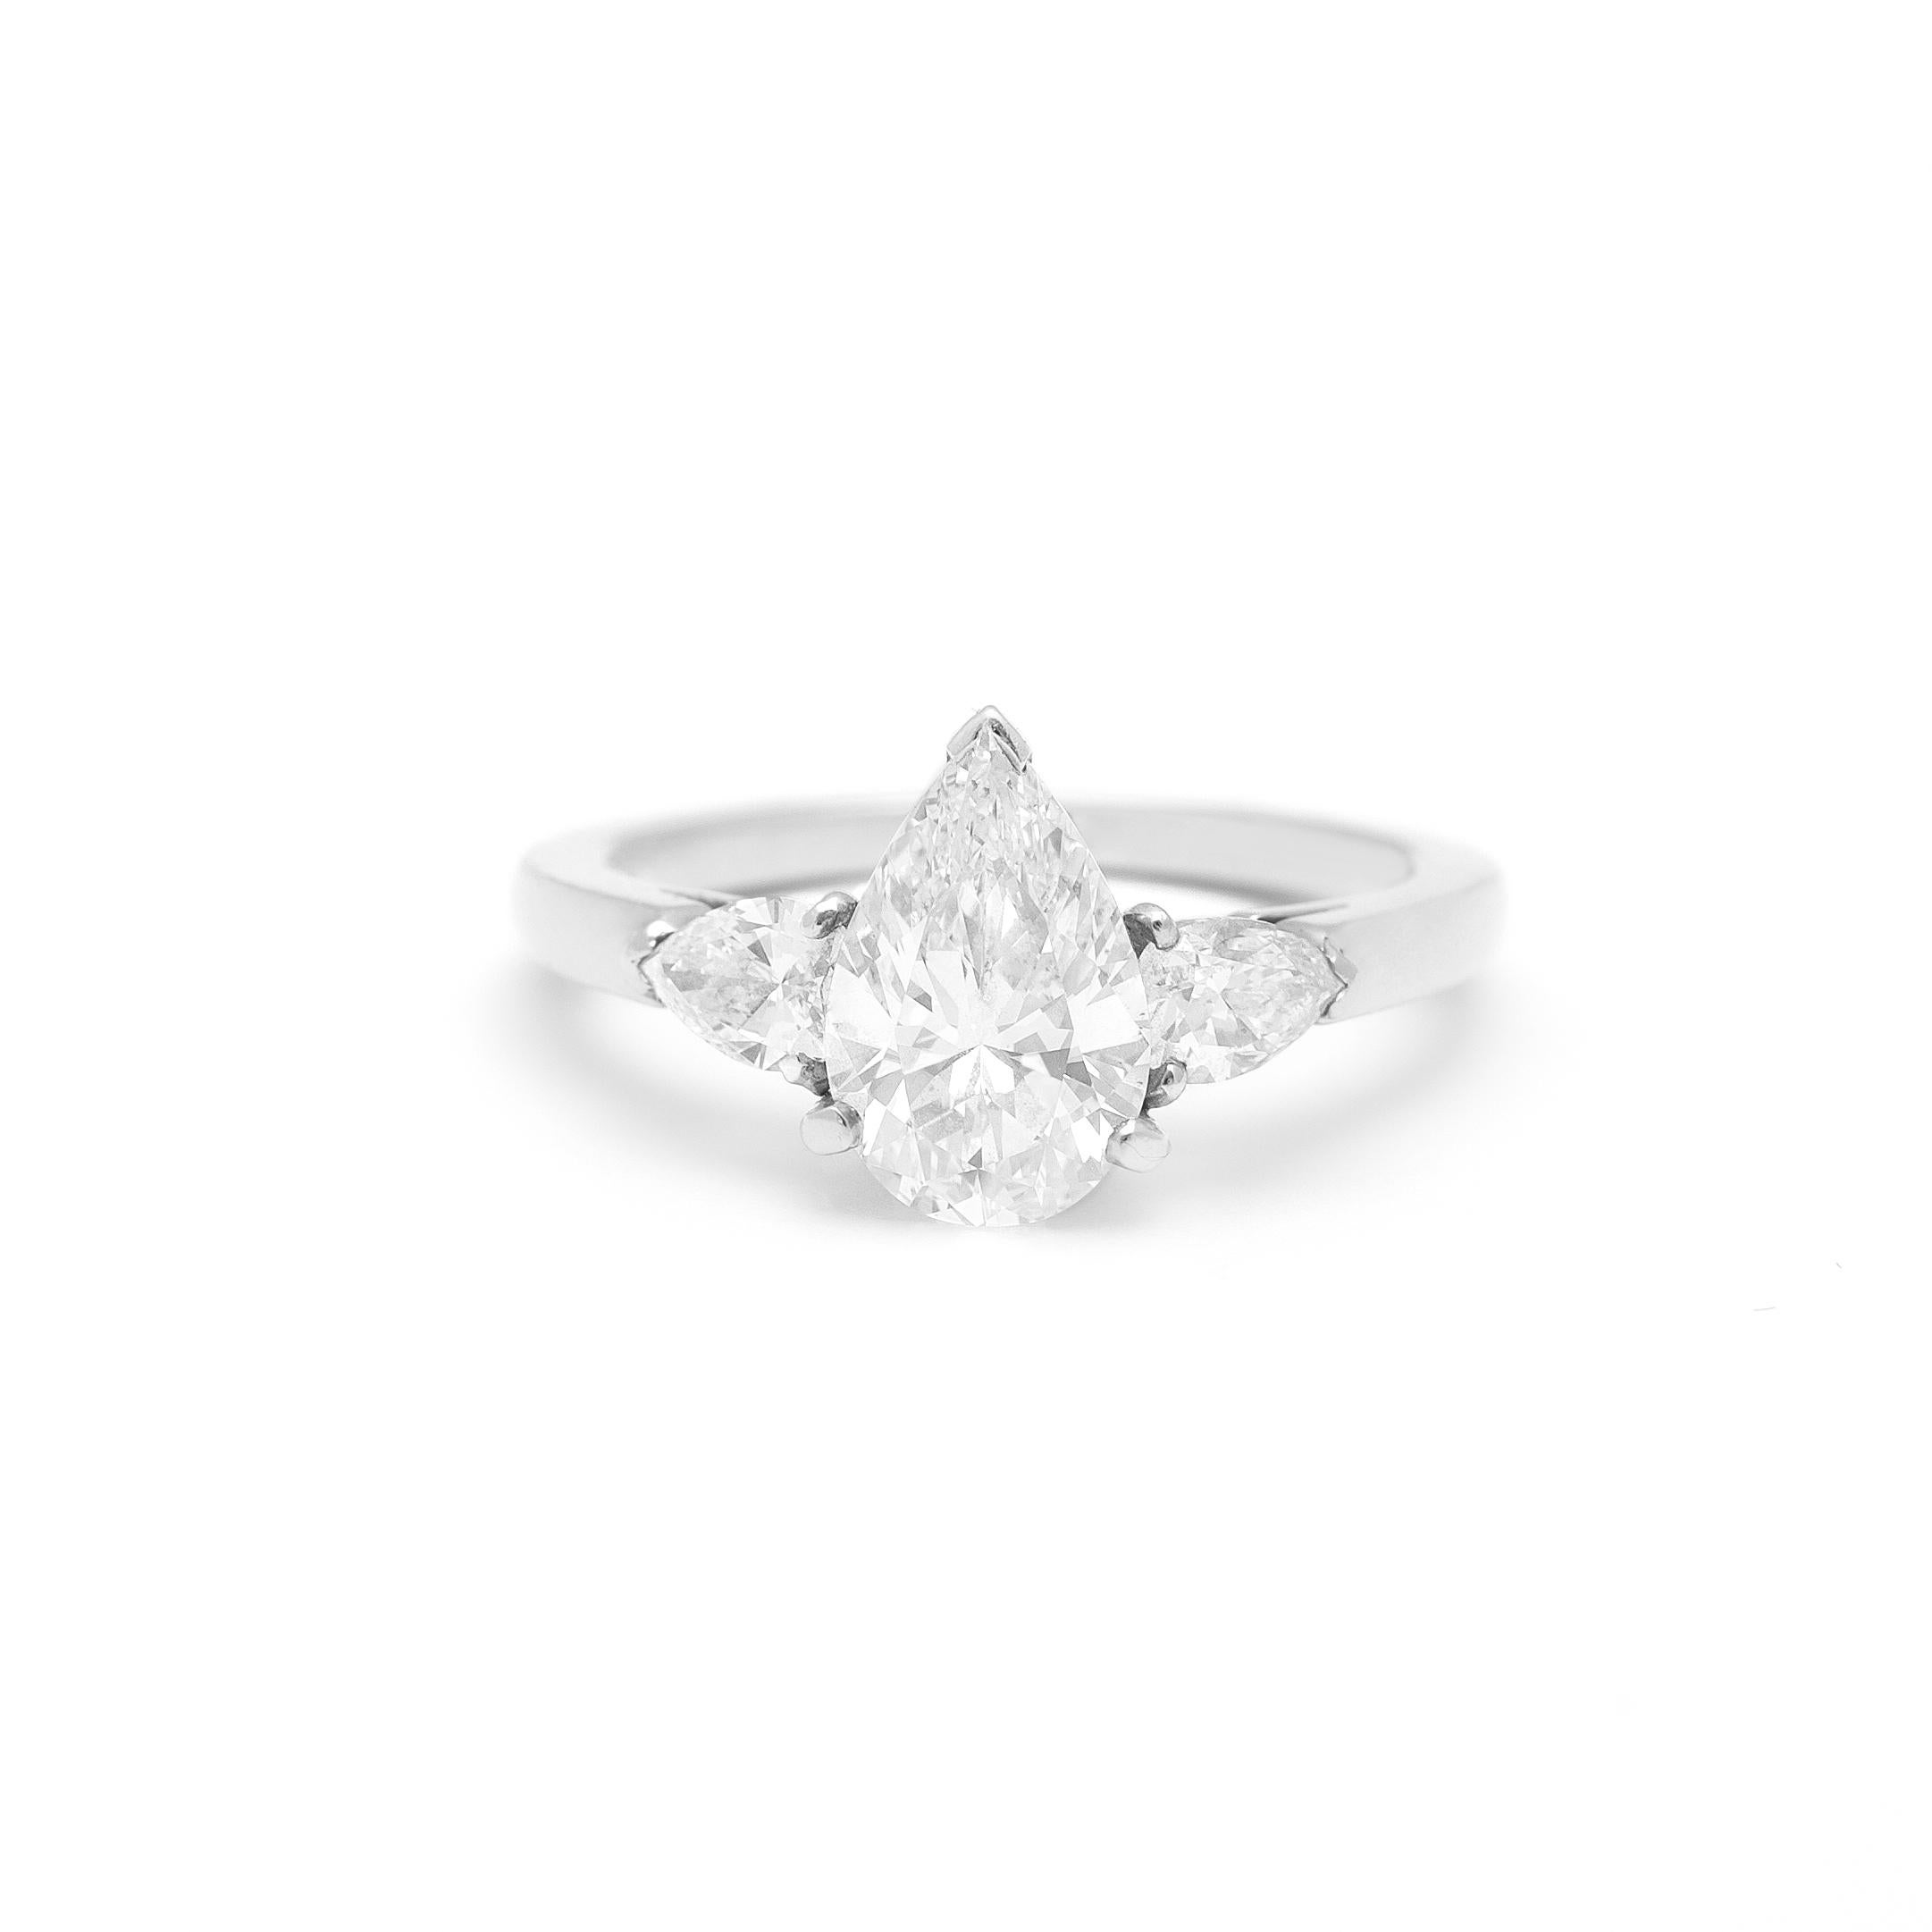 Van Cleef and Arpels 1.51 carat Pear Shape D Vvs1 Solitaire White Gold 18K Ring.
1.51 carat Pear Shape D Vvs1 according to a French Laboratory certificate from 1998.
The central Diamond is shouldered each side by two Pear shape Diamond approximately